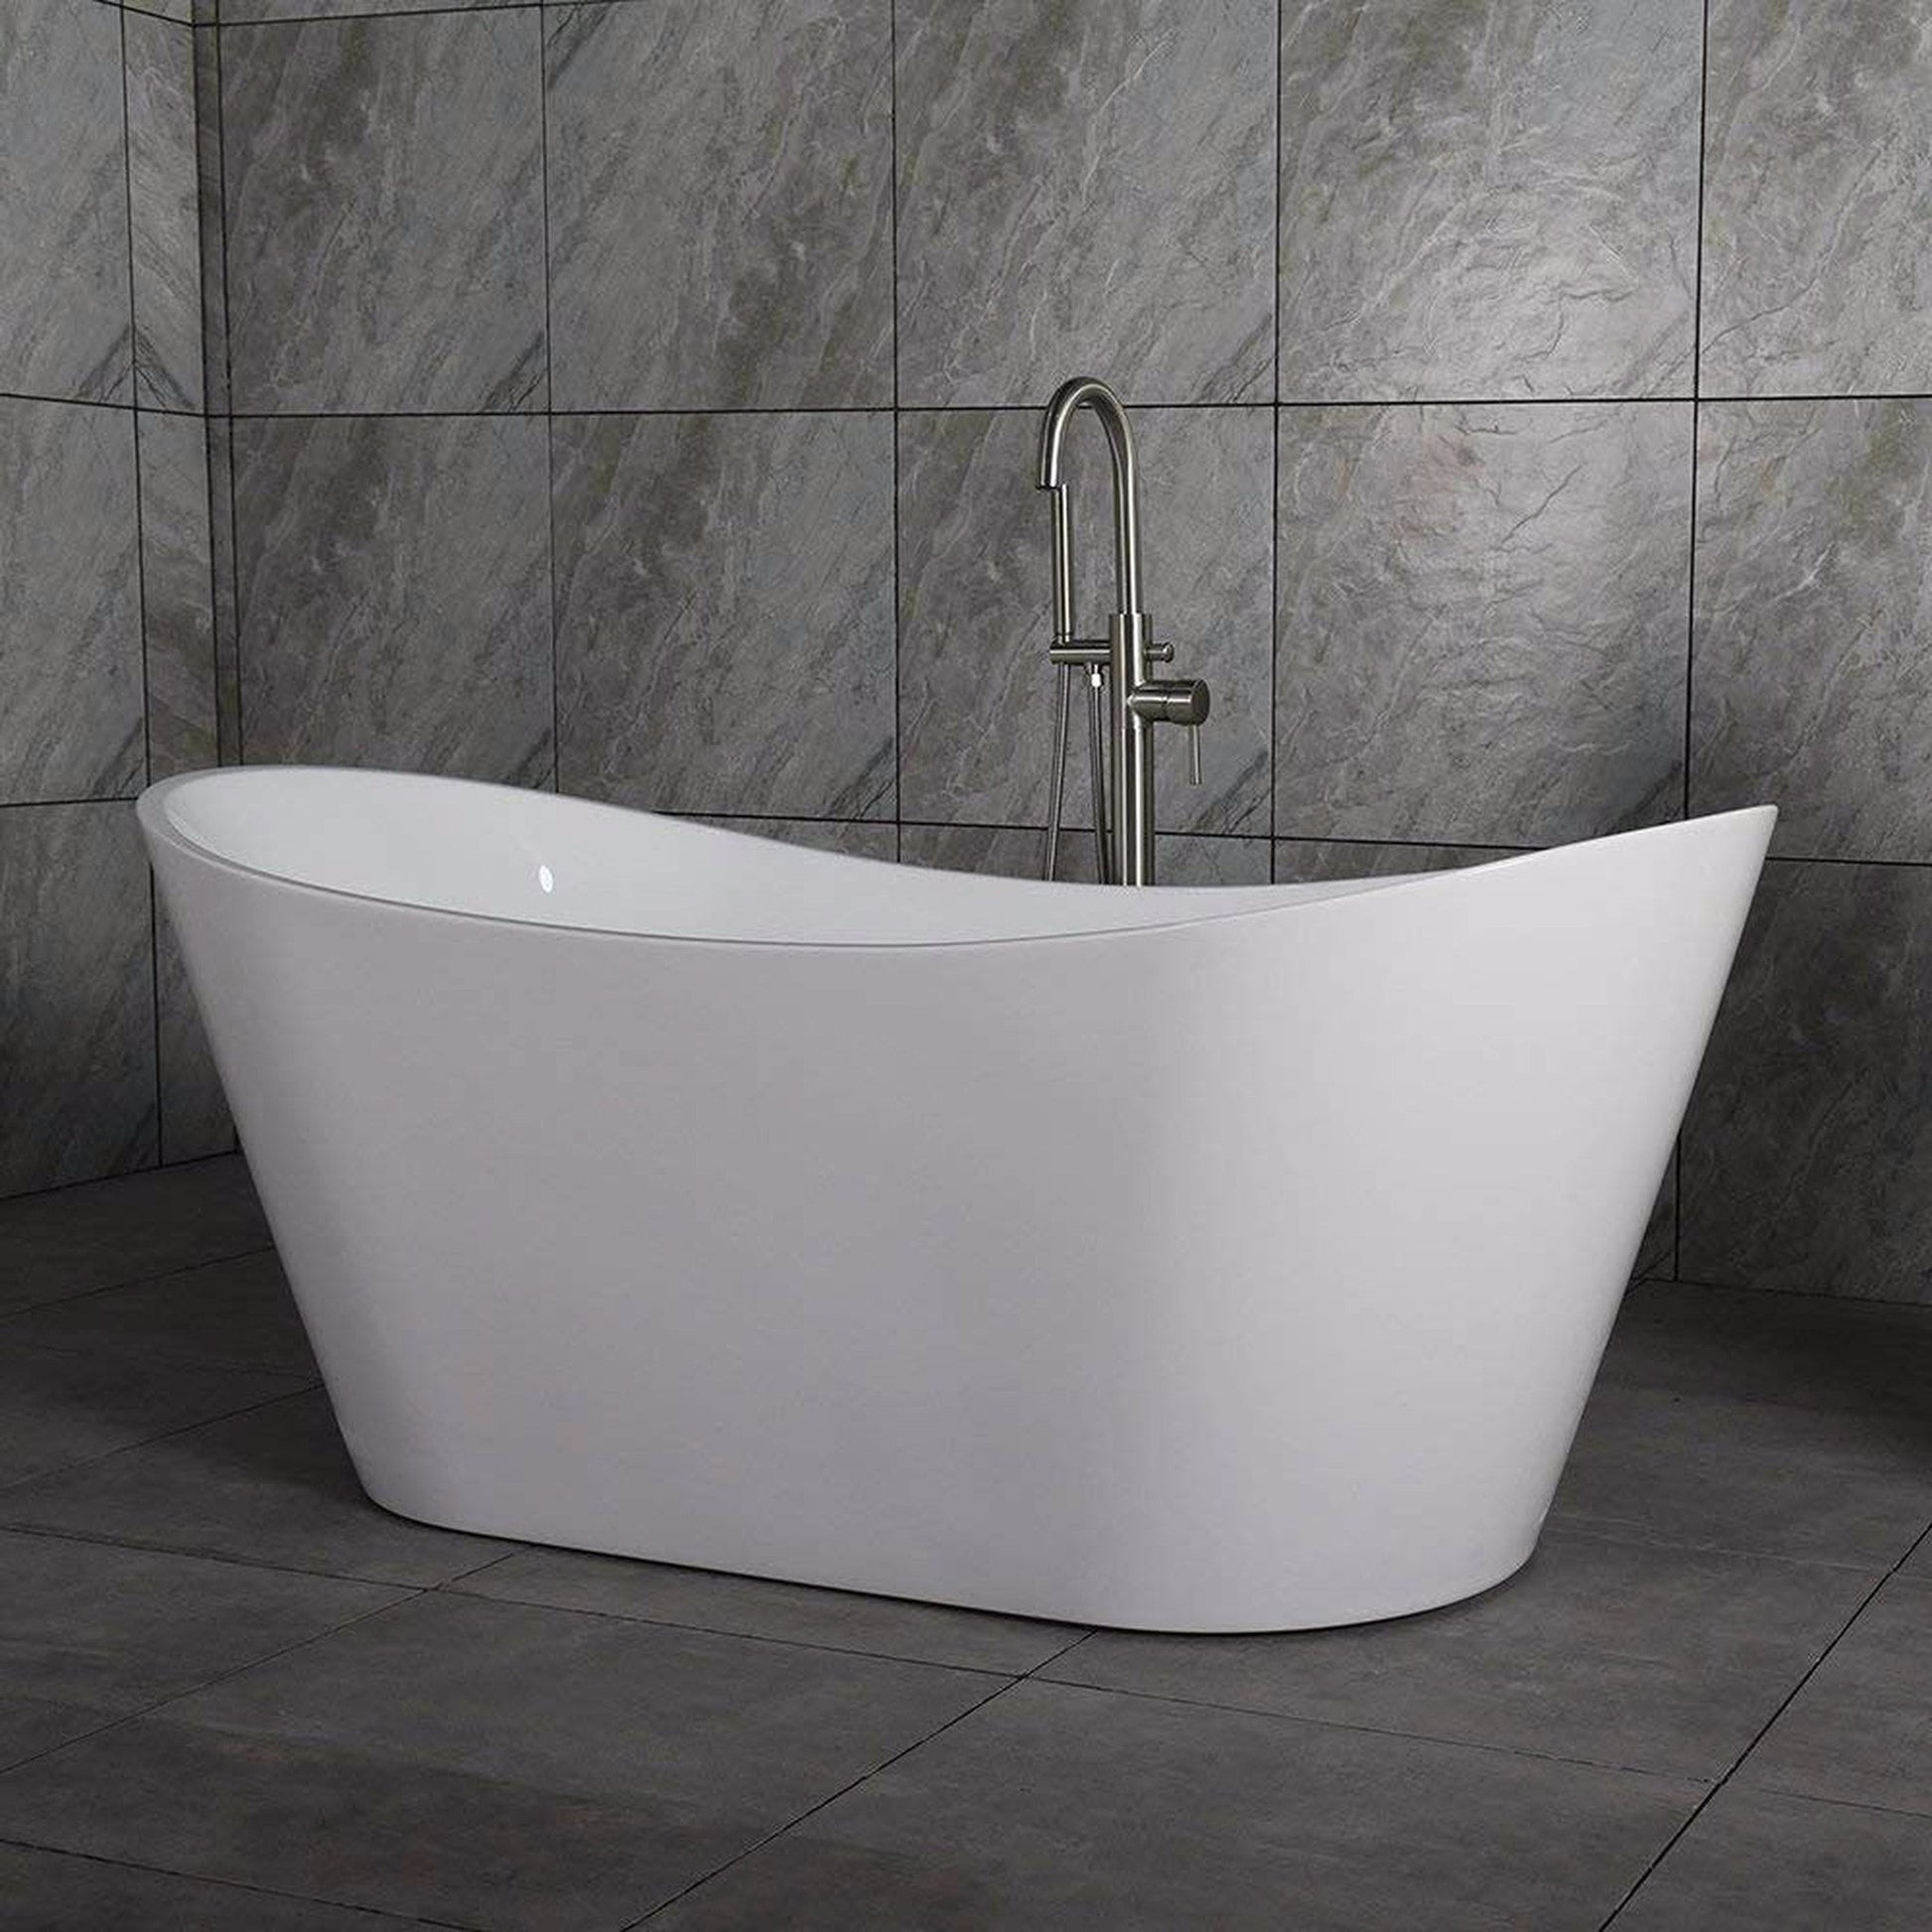 WoodBridge B0010 67" White Acrylic Freestanding Contemporary Soaking Bathtub With Brushed Nickel Drain, Overflow, F0023BNSQ Tub Filler and Caddy Tray